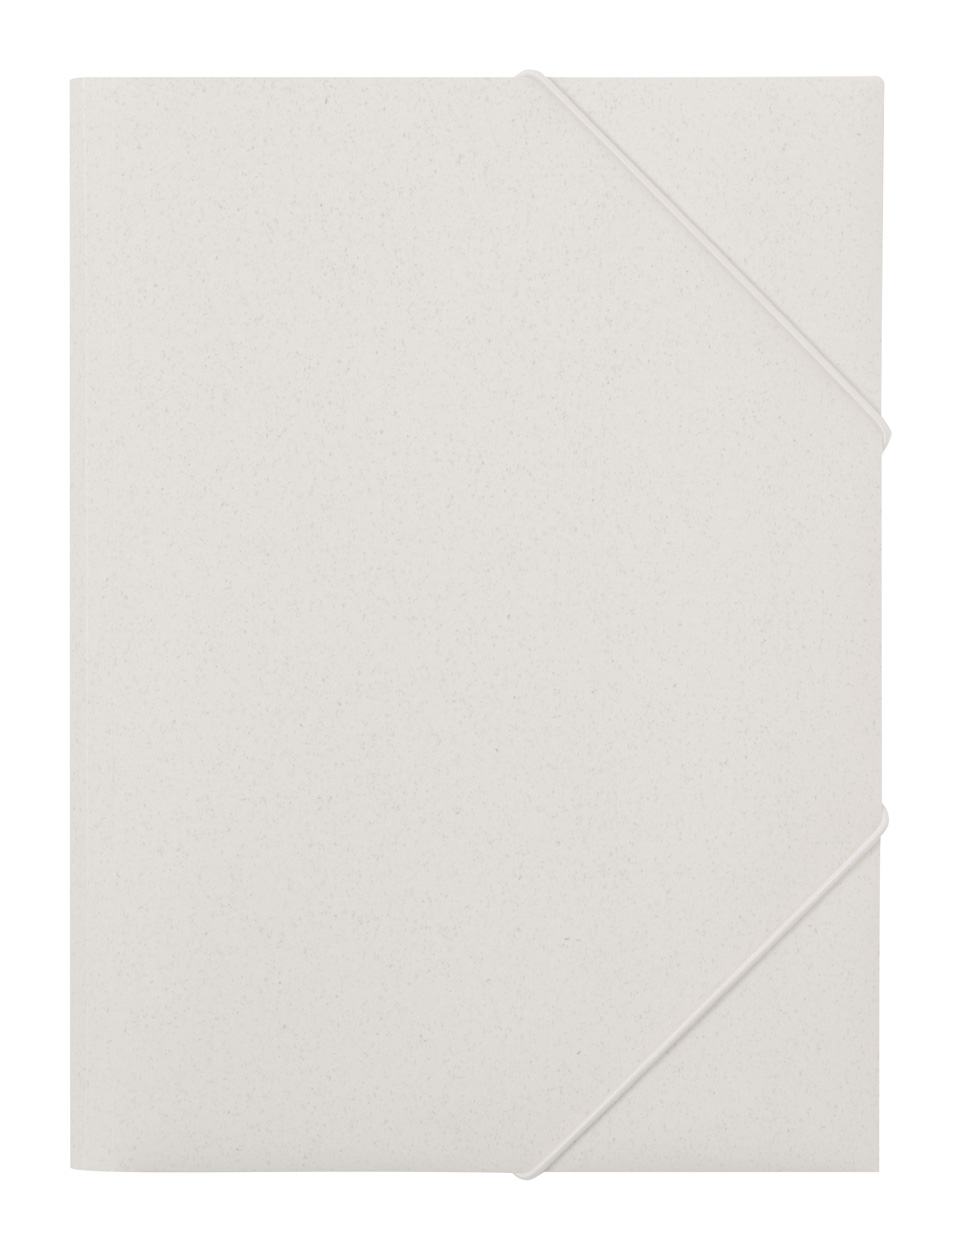 Quixar style for documents - beige